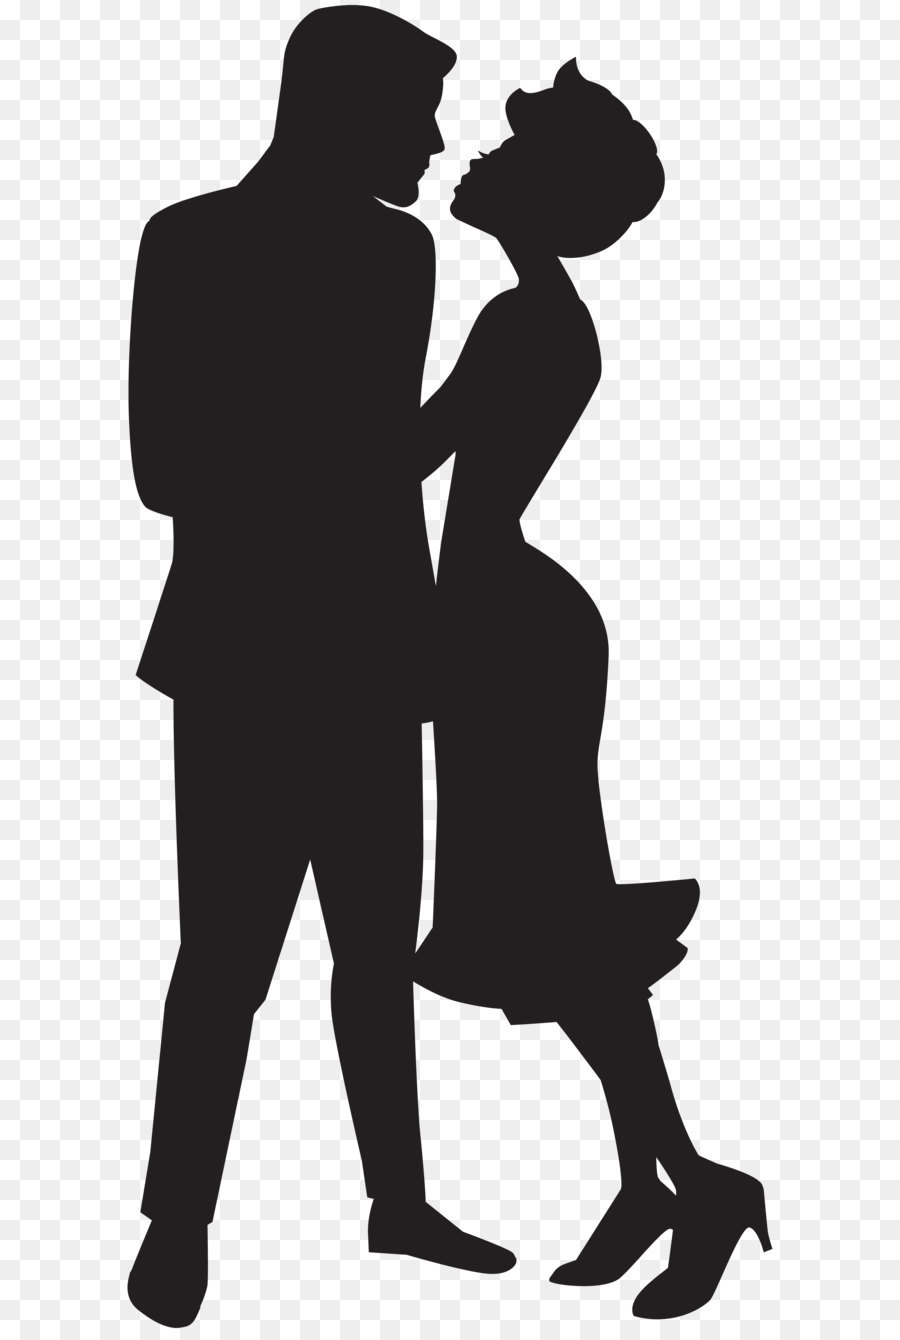 Silhouette Clip art - Couple in Love Silhouette PNG Clip Art png download - 3902*8000 - Free Transparent Silhouette png Download.